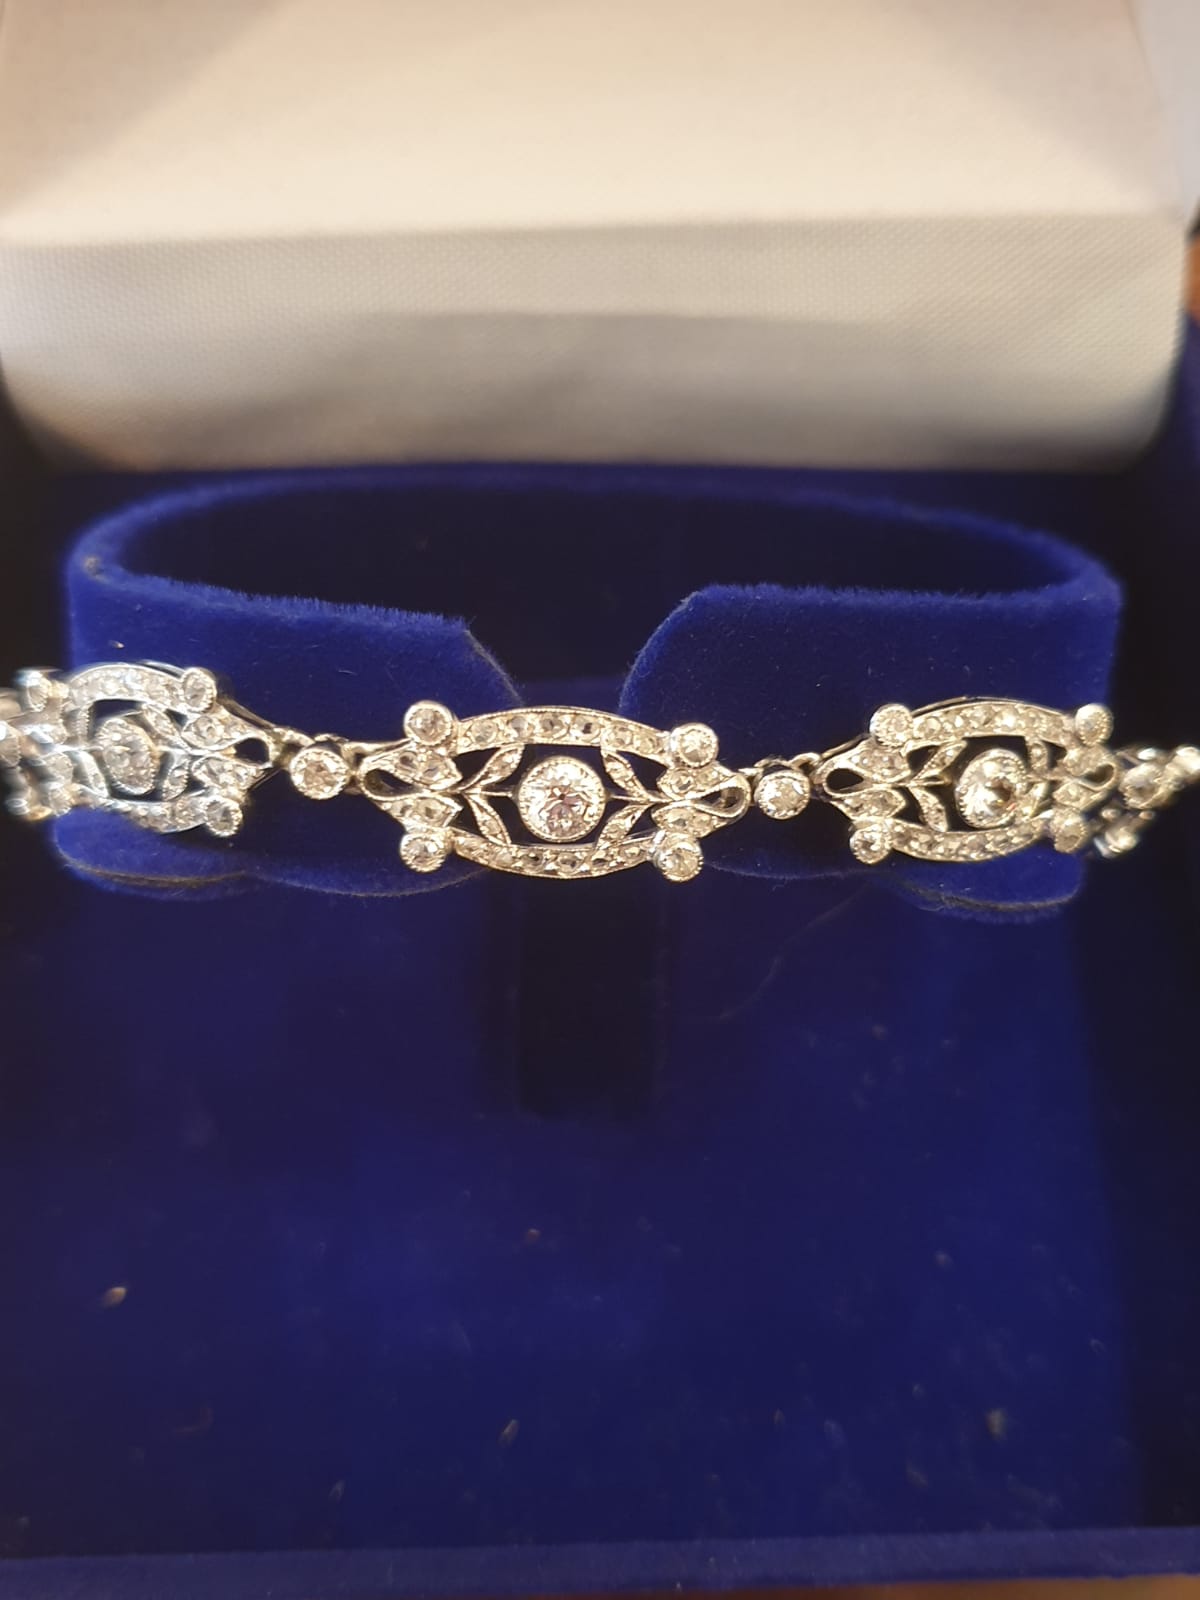 Art deco era platinum old mine cut Diamond link braclet with estimate diamond weight of 4 carats H colour white vs clearity braclet was made in the artdeco era 1920 famous with geomatric design 